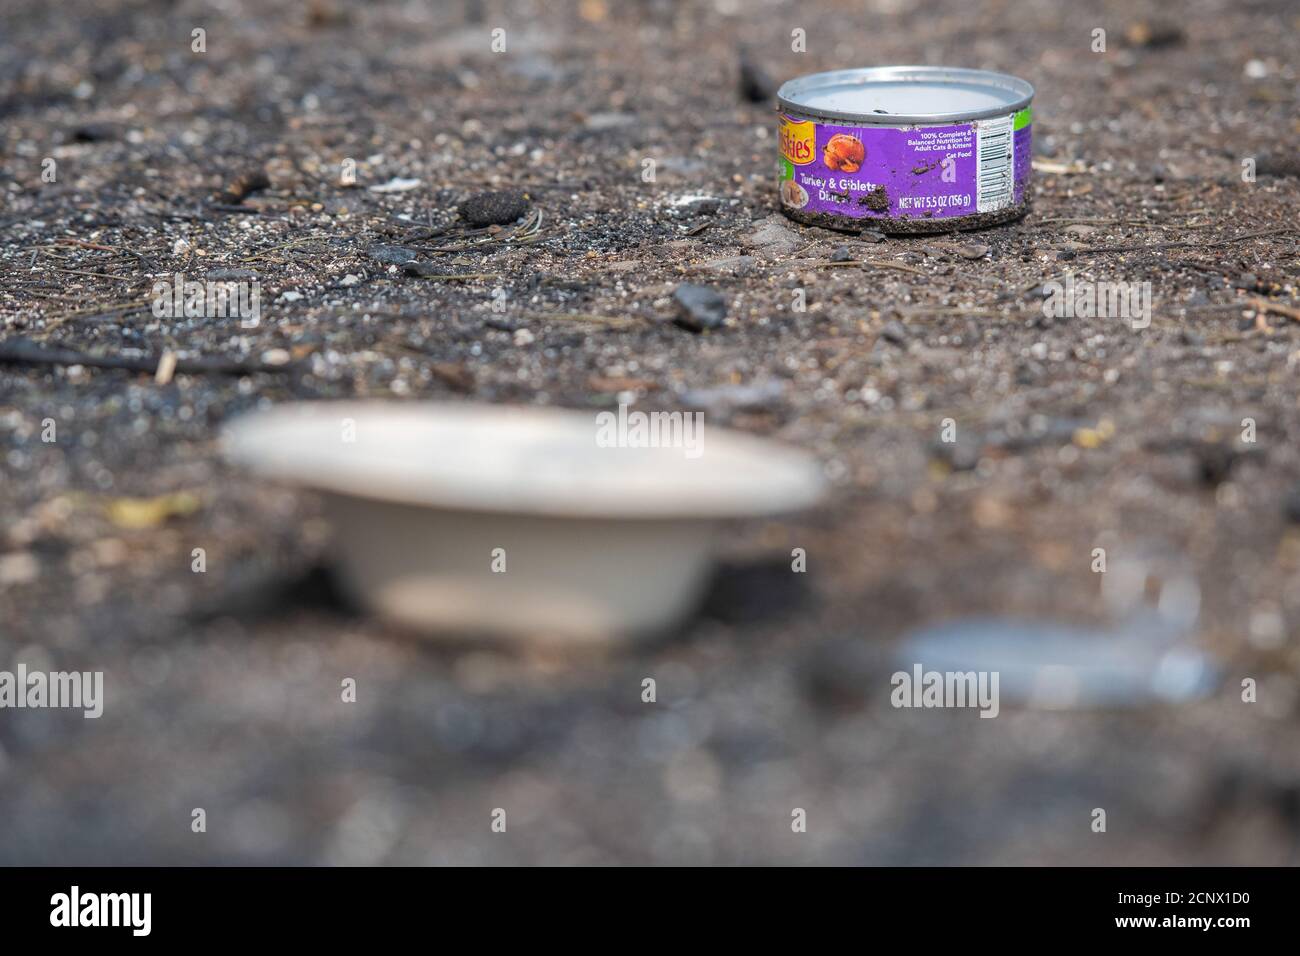 TALENT, ORE - SEPTEMBER 18, 2020: A general view of cat food left out for cats that are missing amid the aftermath of the Almeda Fire. The town of Talent, Oregon, showing the burned out homes, cars and rubble left behind. In Talent, about 20 miles north of the California border, homes were charred beyond recognition. Across the western US, at least 87 wildfires are burning, according to the National Interagency Fire Center. They've torched more than 4.7 million acres -- more than six times the area of Rhode Island. Credit: Chris Tuite/imageSPACE Stock Photo